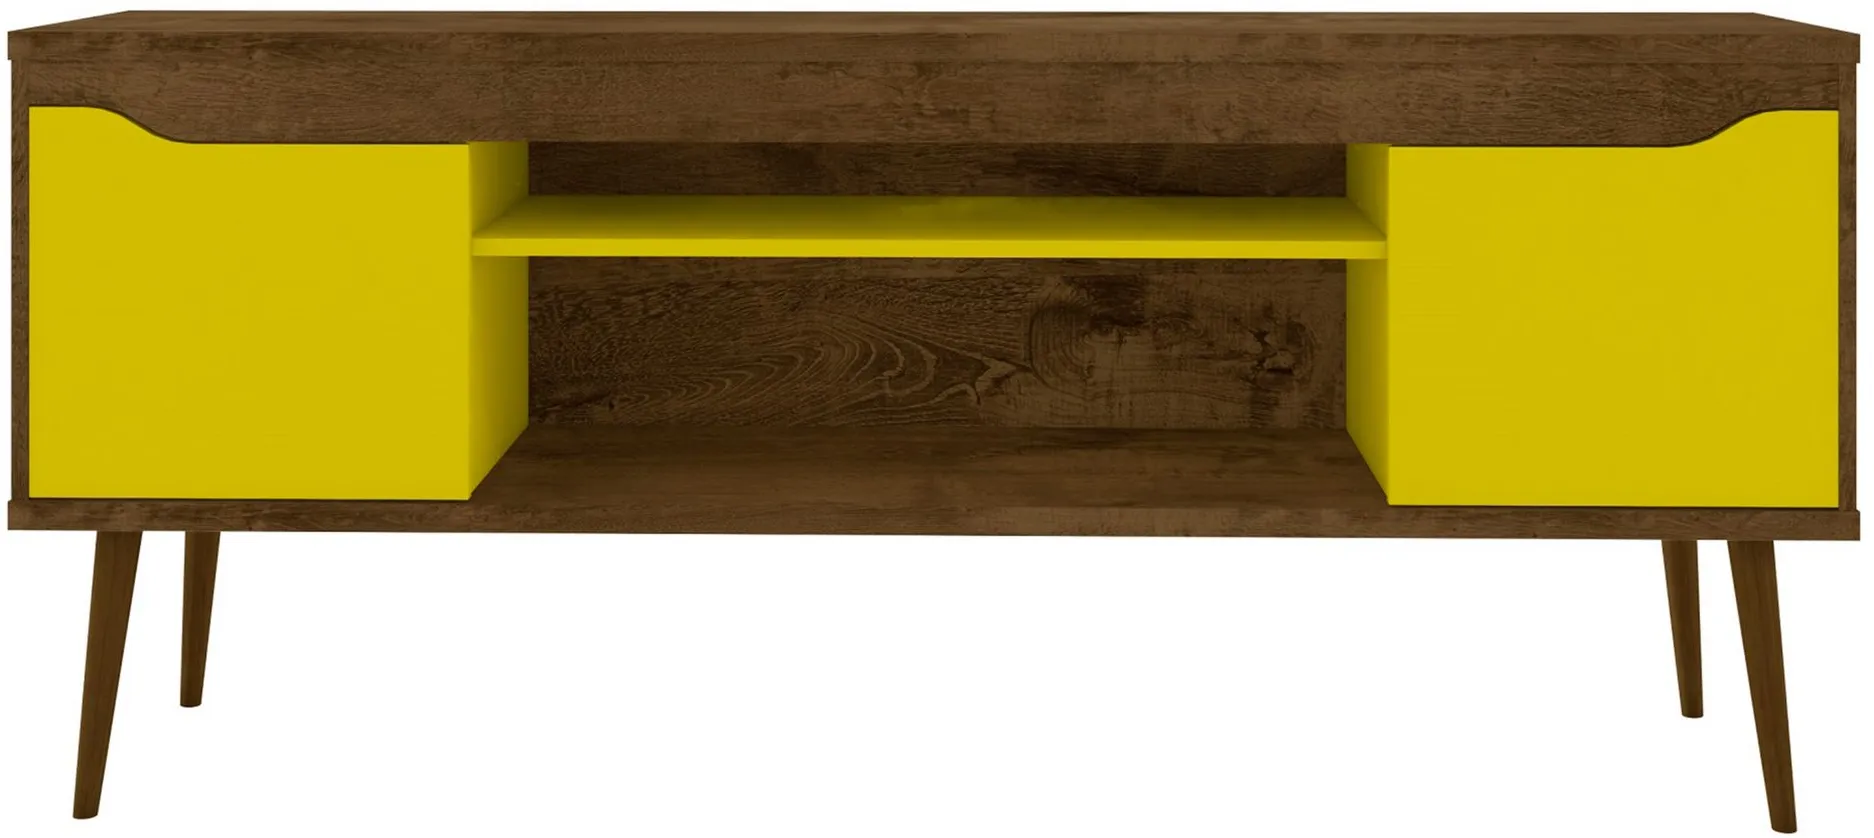 Bradley 62" TV Stand in Rustic Brown and Yellow by Manhattan Comfort